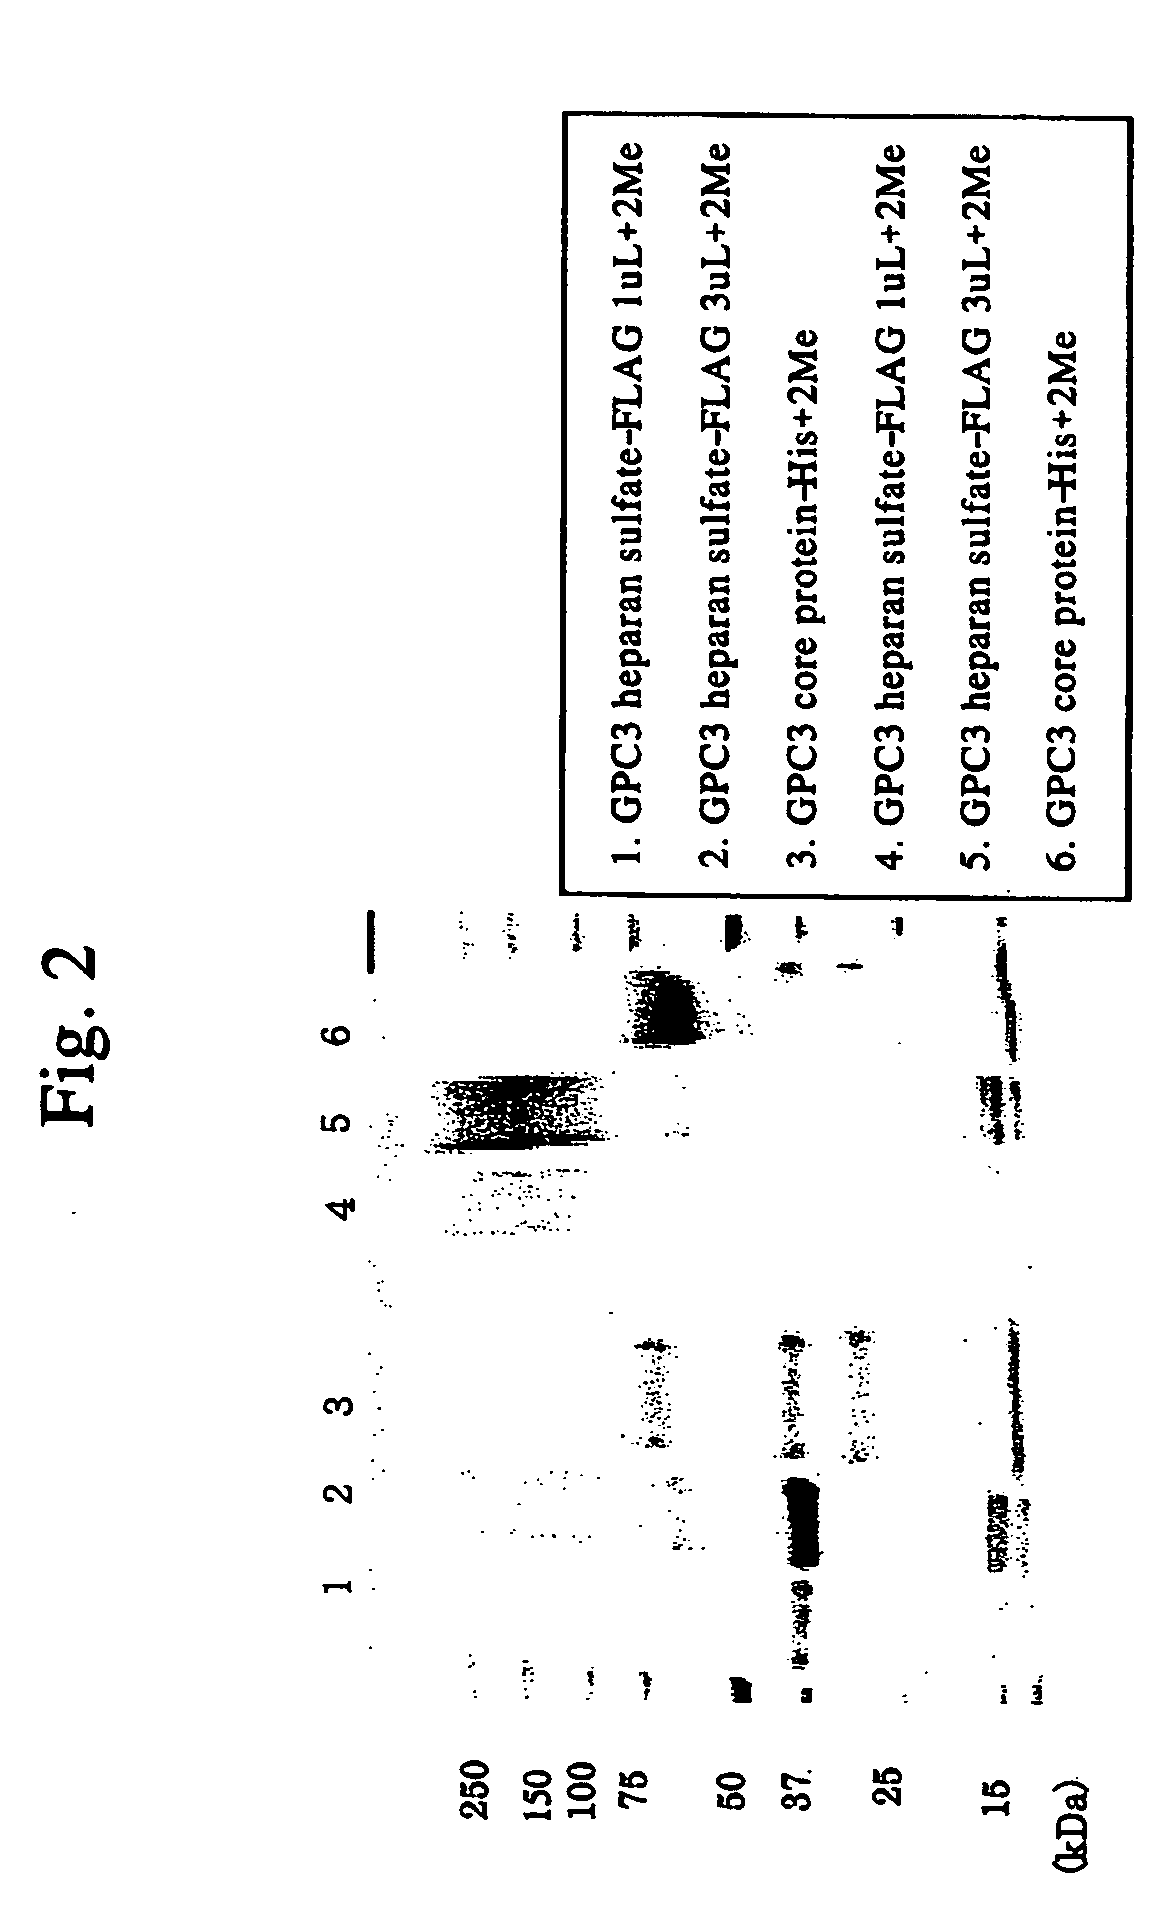 Method for diagnosing cancer by detecting gpc3